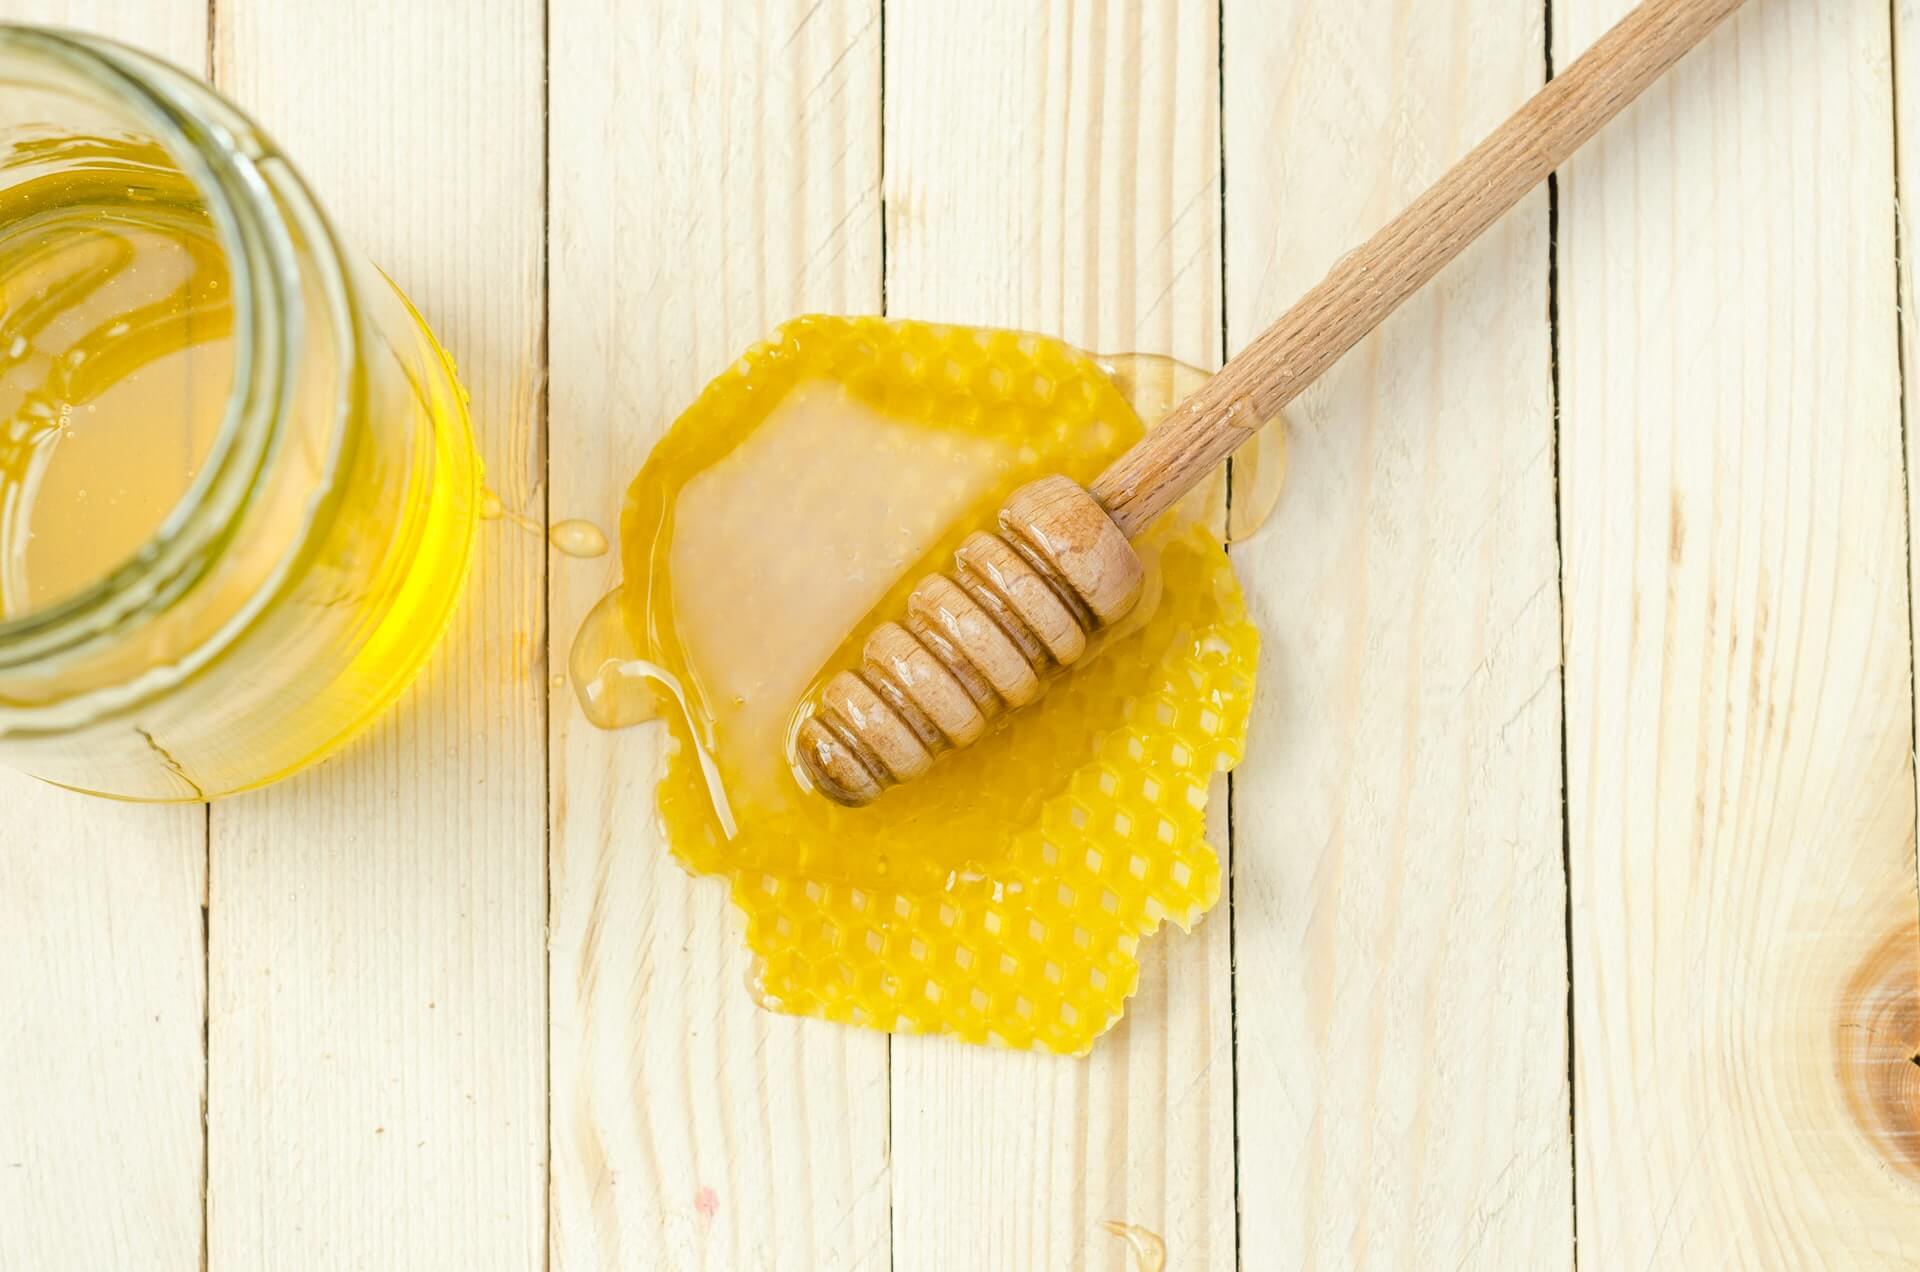 HoneyGate: The Curious Case of Honey adulteration in India